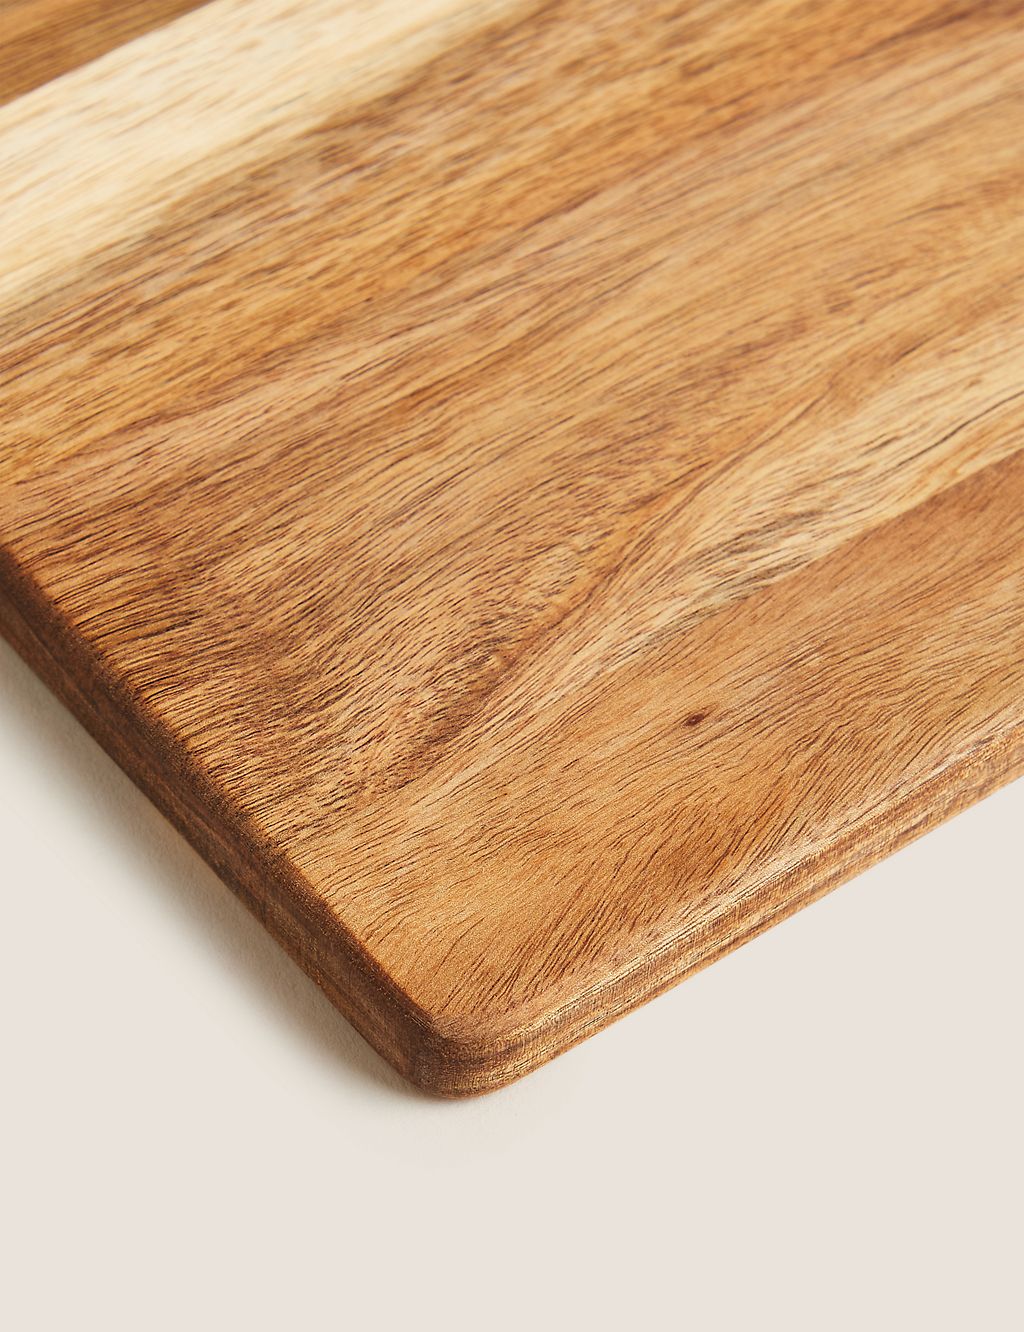 Large Wooden Chopping Board 1 of 3